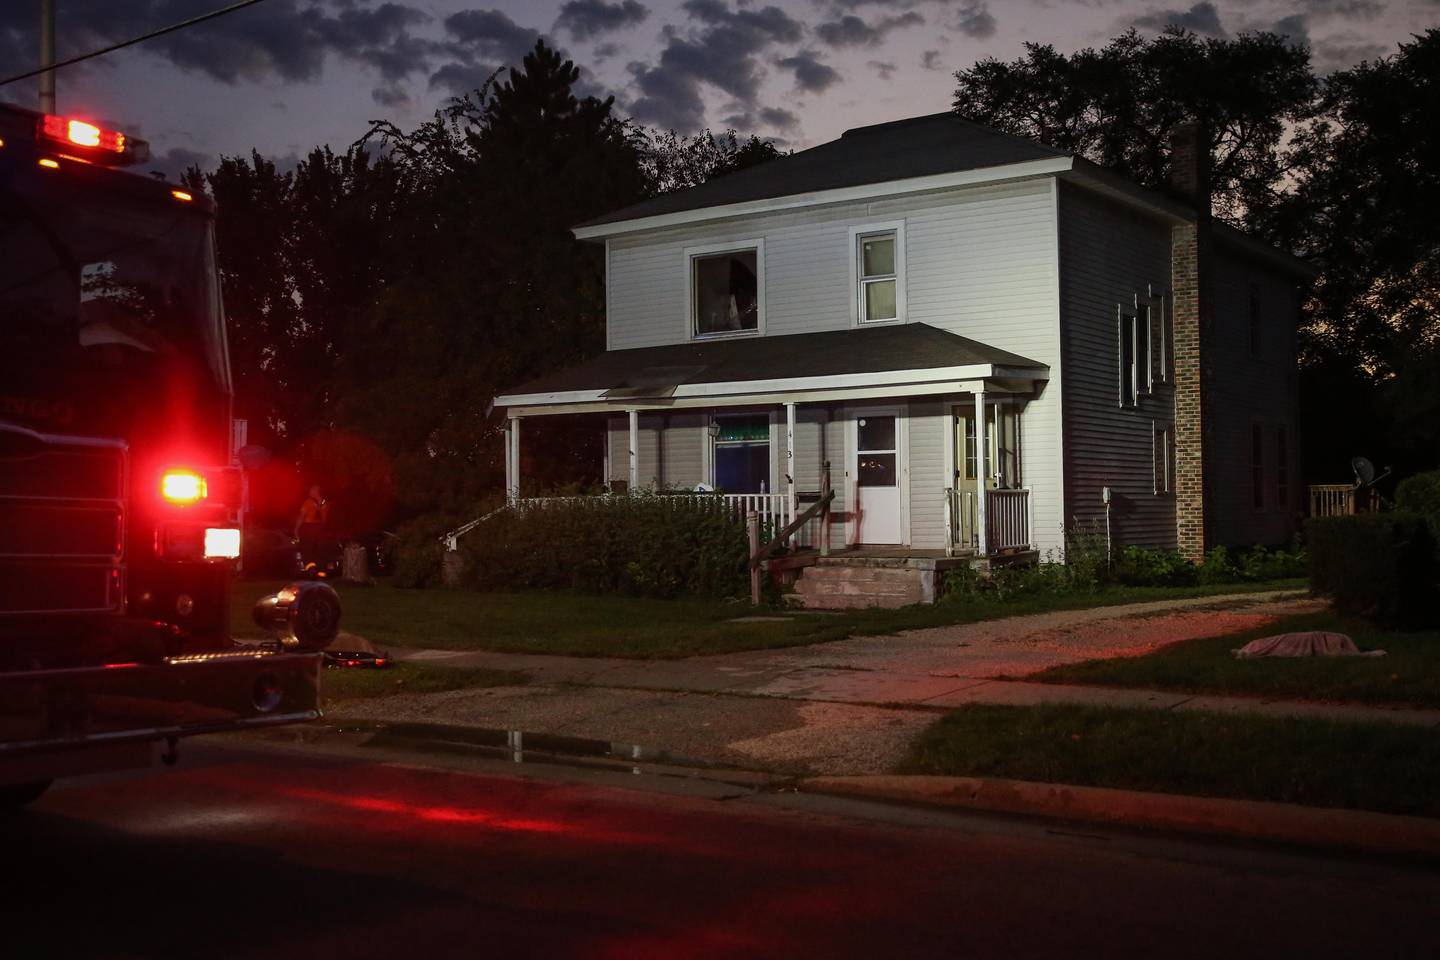 A dog was killed and four residents were displaced following a fire on Tuesday, Sept. 20, 2022, in Marengo.